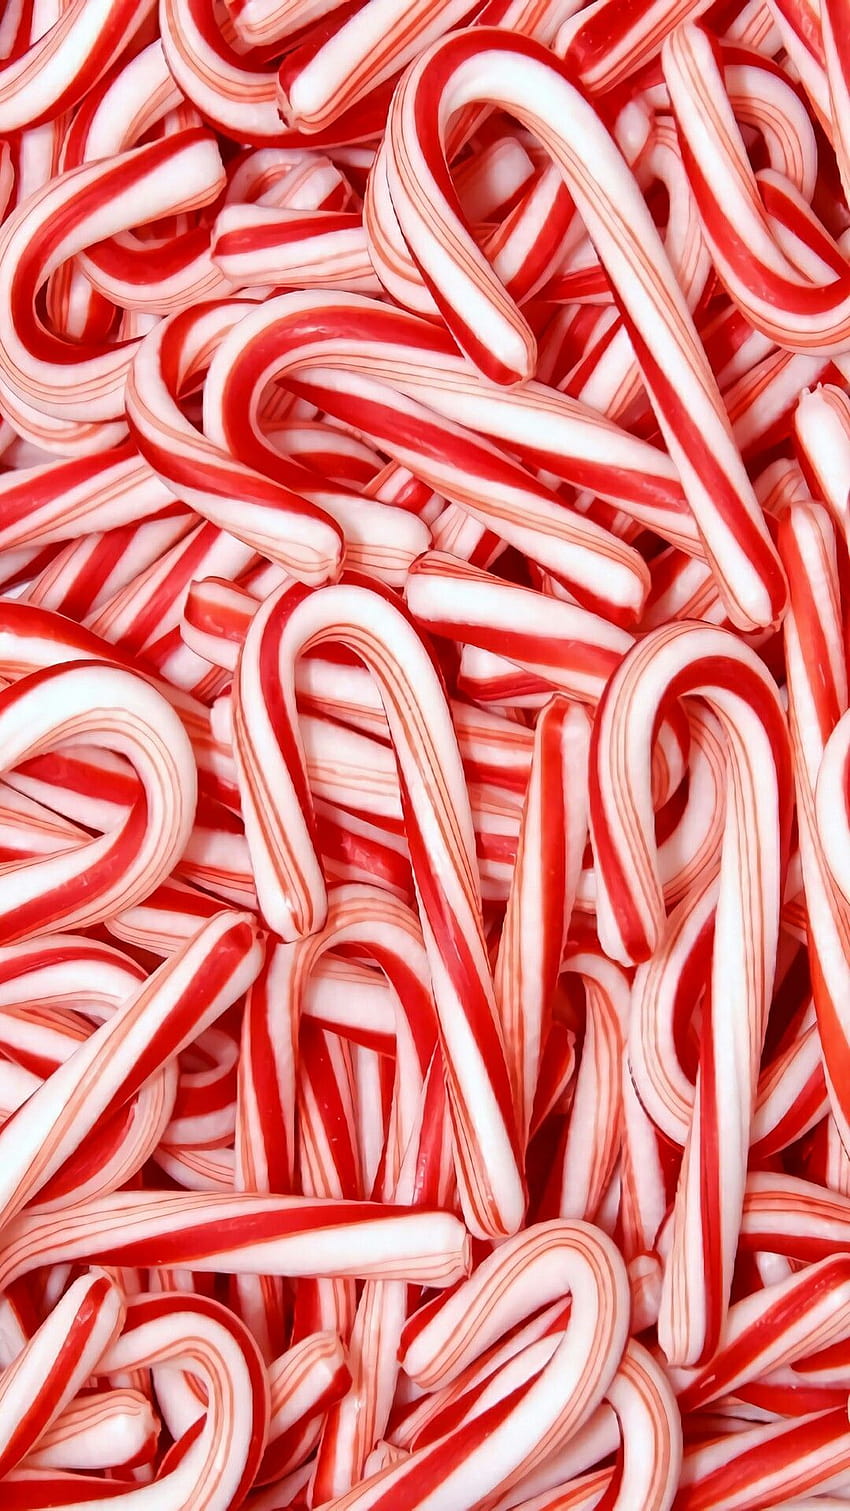 A close up of candy canes - Candy cane, candy